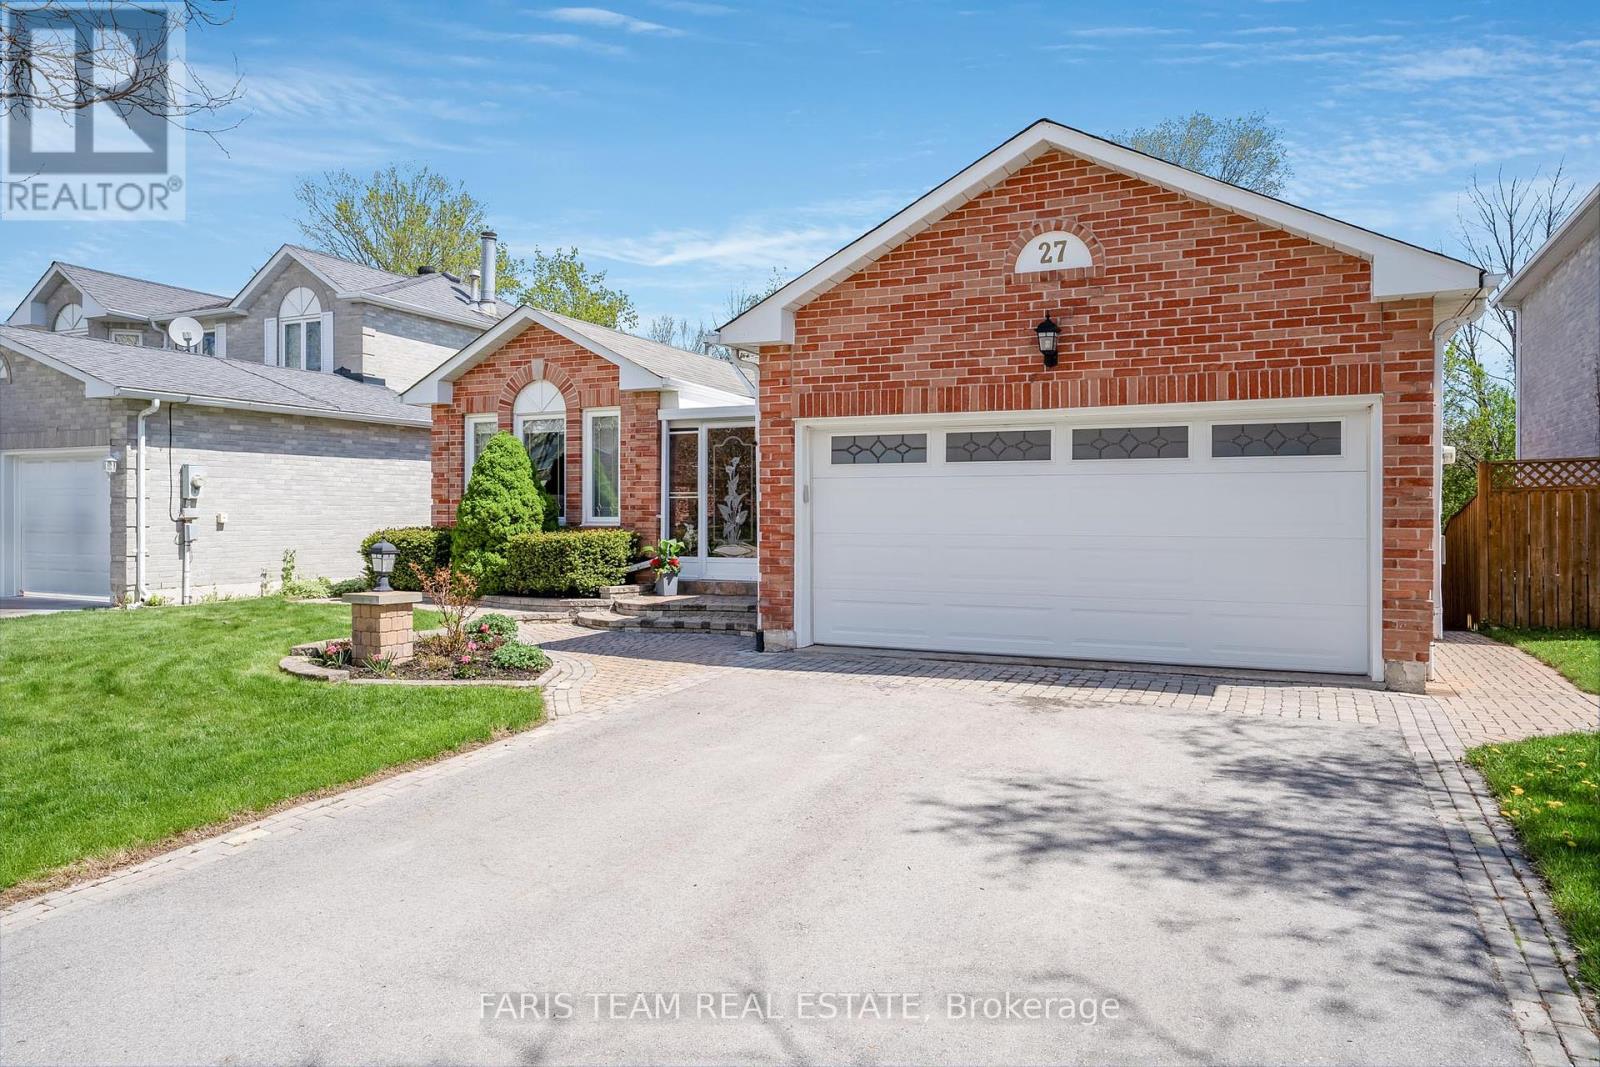 27 BARRE DR, barrie, Ontario